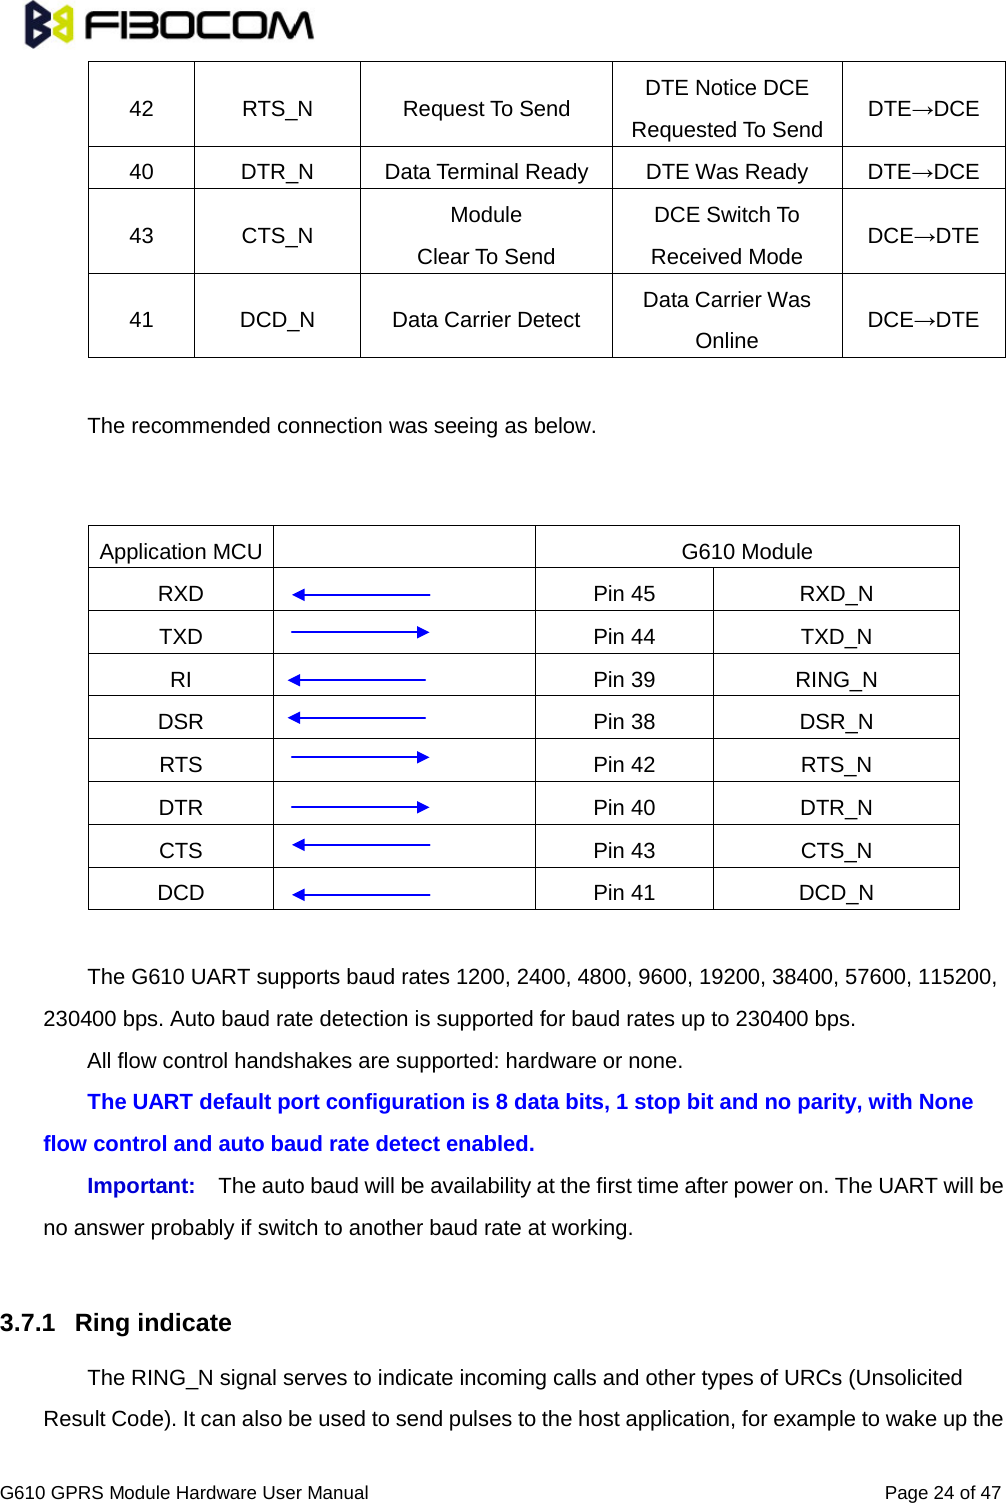                                                                                                          G610 GPRS Module Hardware User Manual                                                          Page 24 of 47  42 RTS_N Request To Send DTE Notice DCE Requested To Send DTE→DCE 40 DTR_N Data Terminal Ready DTE Was Ready DTE→DCE 43 CTS_N Module Clear To Send DCE Switch To Received Mode DCE→DTE 41 DCD_N Data Carrier Detect Data Carrier Was Online DCE→DTE  The recommended connection was seeing as below.     Application MCU    G610 Module RXD  Pin 45 RXD_N TXD  Pin 44 TXD_N RI  Pin 39 RING_N DSR  Pin 38 DSR_N RTS  Pin 42 RTS_N DTR  Pin 40 DTR_N CTS  Pin 43 CTS_N DCD  Pin 41 DCD_N  The G610 UART supports baud rates 1200, 2400, 4800, 9600, 19200, 38400, 57600, 115200, 230400 bps. Auto baud rate detection is supported for baud rates up to 230400 bps.   All flow control handshakes are supported: hardware or none. The UART default port configuration is 8 data bits, 1 stop bit and no parity, with None flow control and auto baud rate detect enabled. Important: The auto baud will be availability at the first time after power on. The UART will be no answer probably if switch to another baud rate at working.      3.7.1 Ring indicate The RING_N signal serves to indicate incoming calls and other types of URCs (Unsolicited Result Code). It can also be used to send pulses to the host application, for example to wake up the    